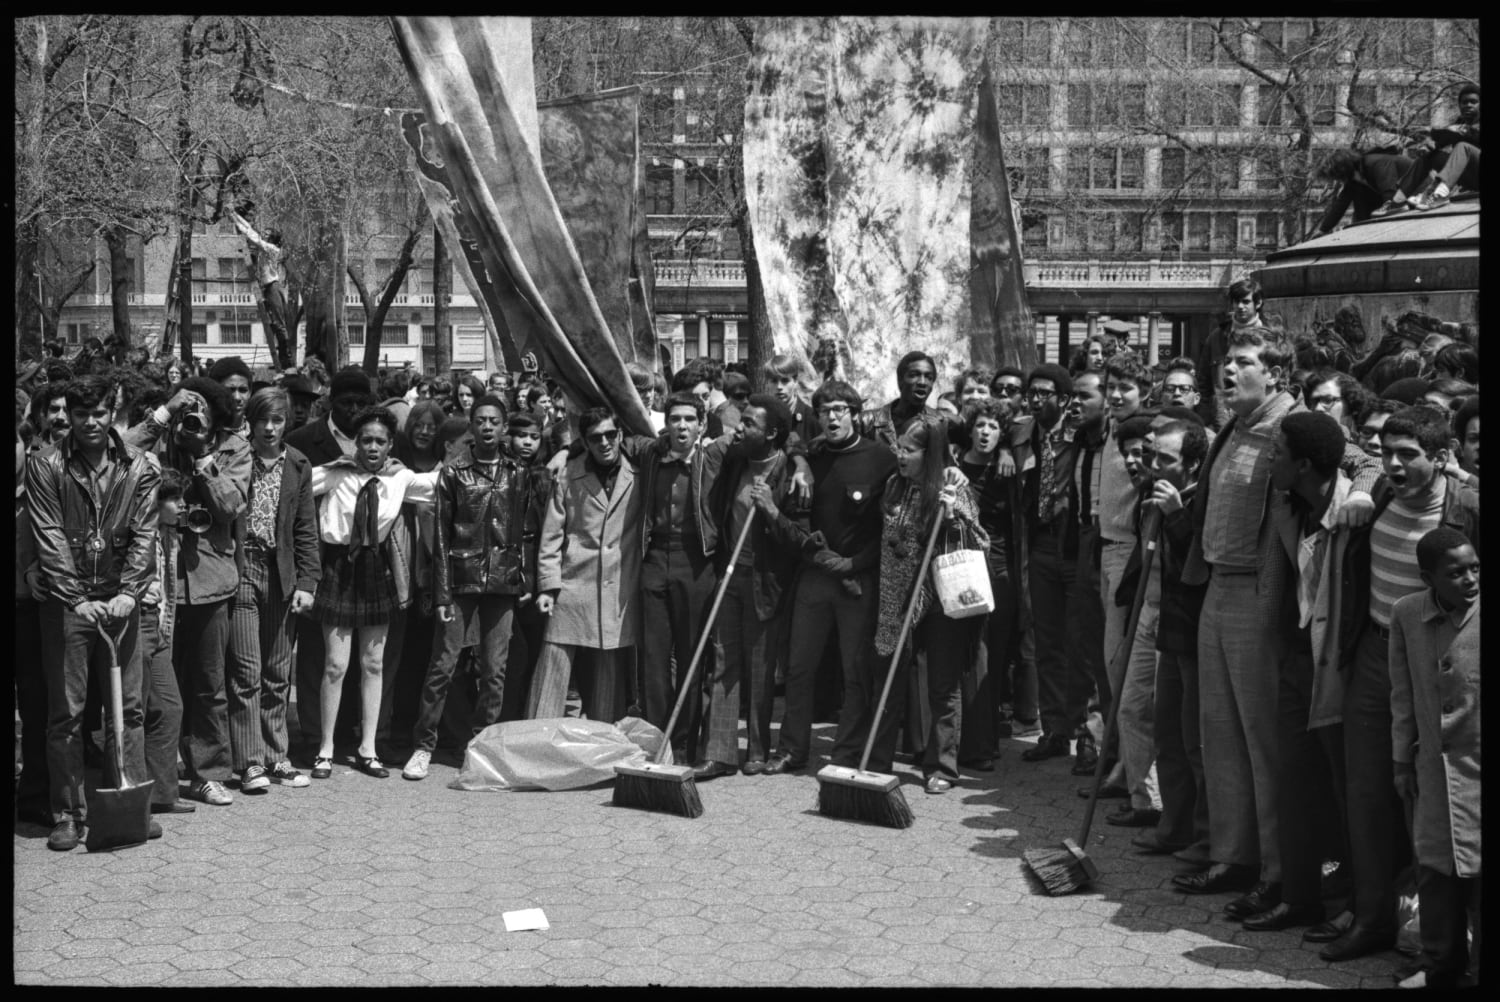 Sweepers at the first Earth Day demonstrations at Union Square, New York - April 22, 1970